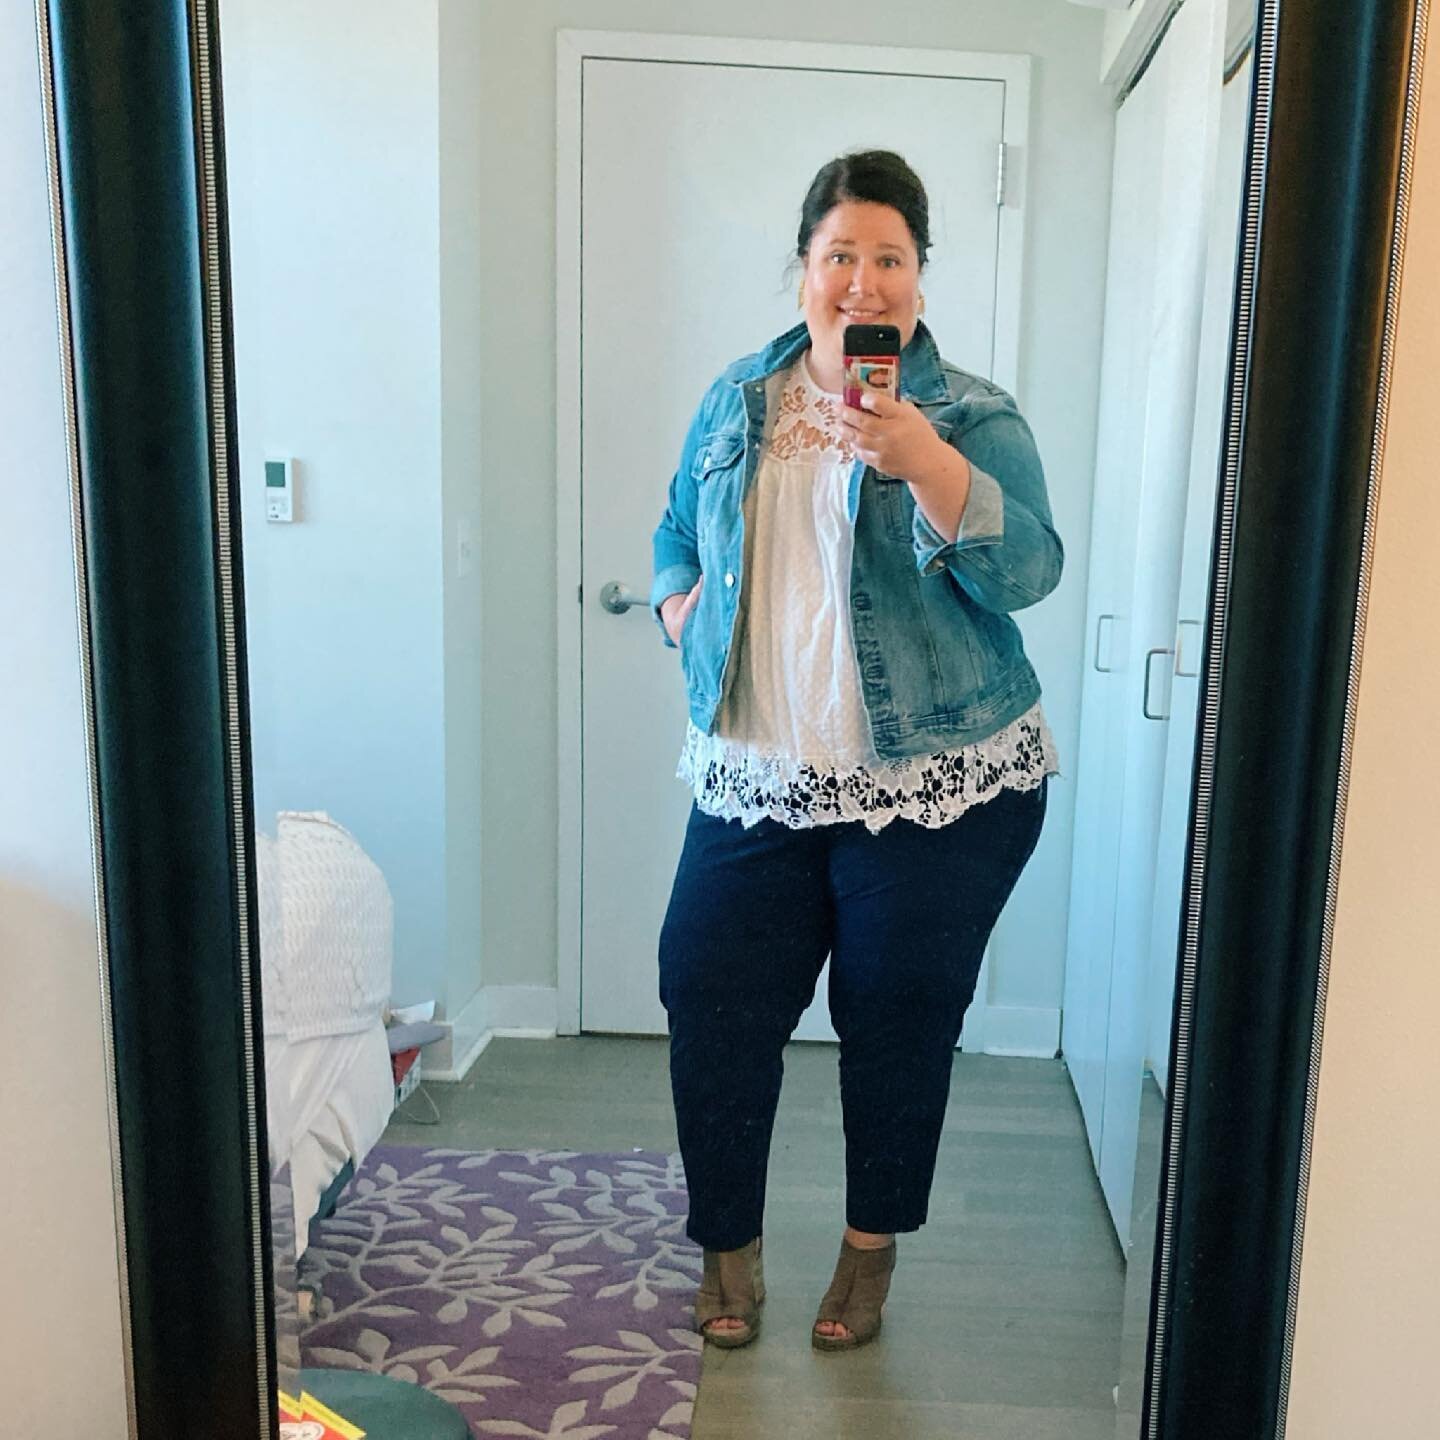 𝙒𝙝𝙖𝙩 𝙄 𝙬𝙤𝙧𝙚 𝙩𝙤 𝘿𝙞𝙣𝙣𝙚𝙧 𝙡𝙖𝙨𝙩 𝙉𝙞𝙜𝙝𝙩. Denim, white and navy: one of my favorite outfit combos of all time. It&rsquo;s always classy and looks effortless. 

Keep the look updated with a fresh top, a trendy earring or the newest p